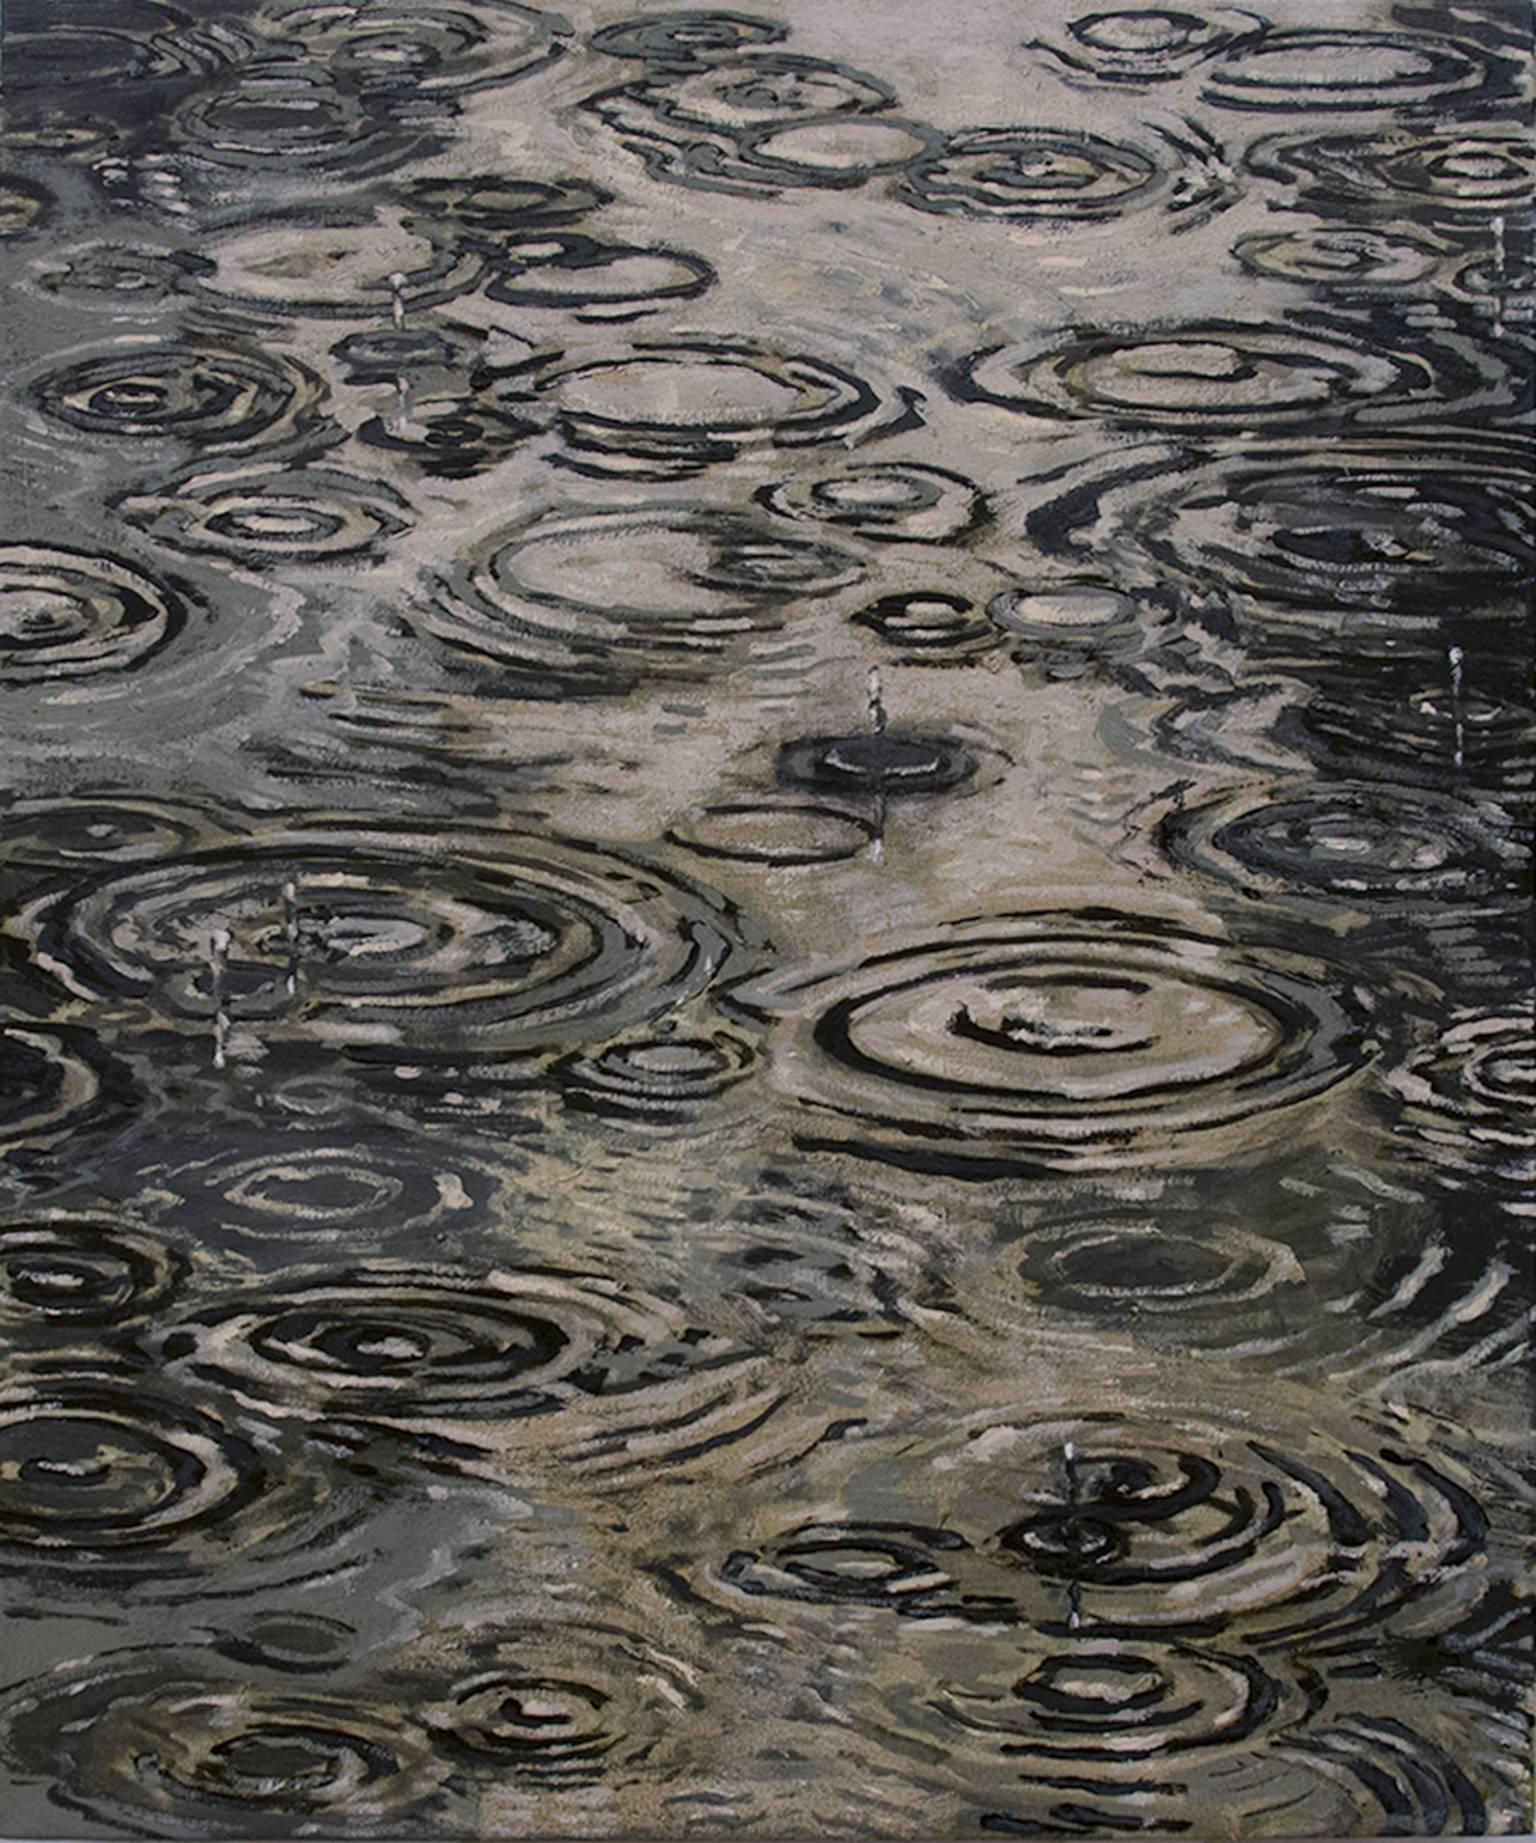 Paul Manes Landscape Painting - Untitled  (rain drops), Oil on Canvas 36 x 30 inches, signed on reverse side.